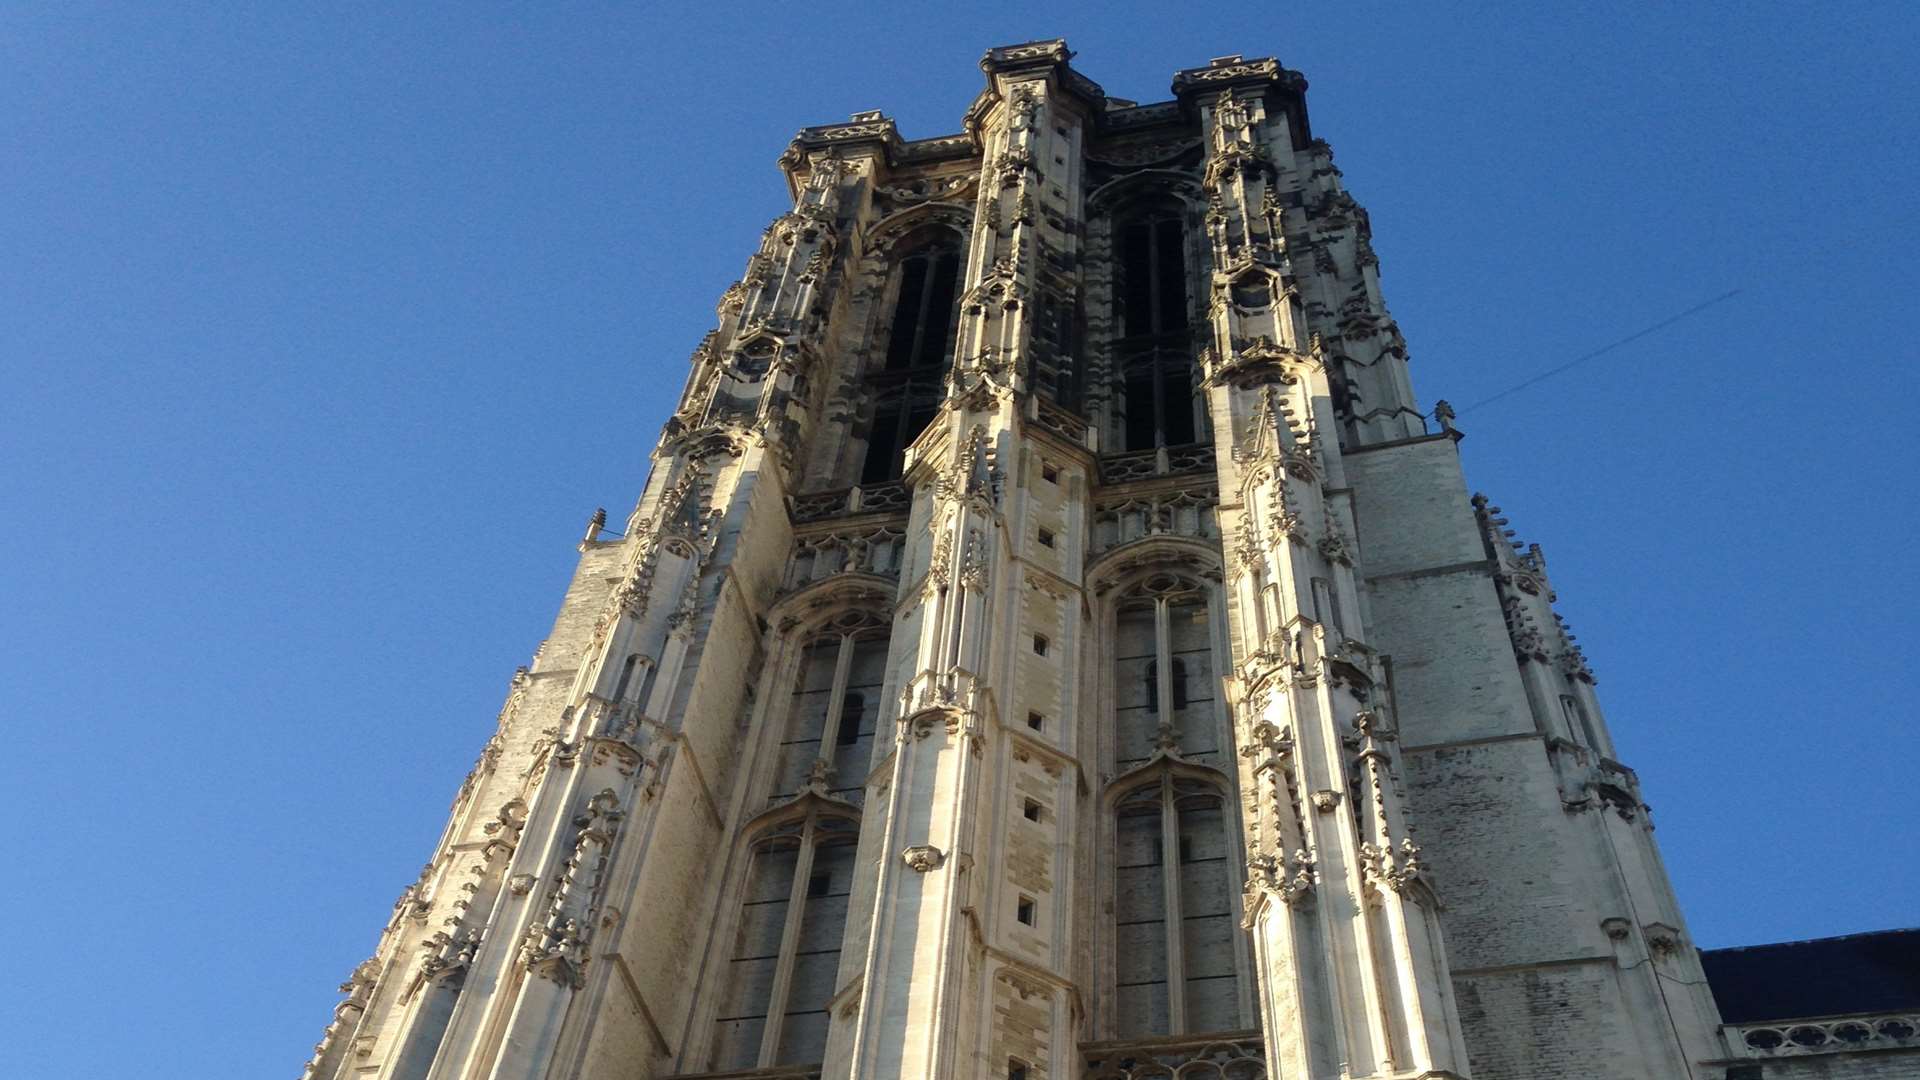 St Rumbolds Tower is the tallest building in Mechelen